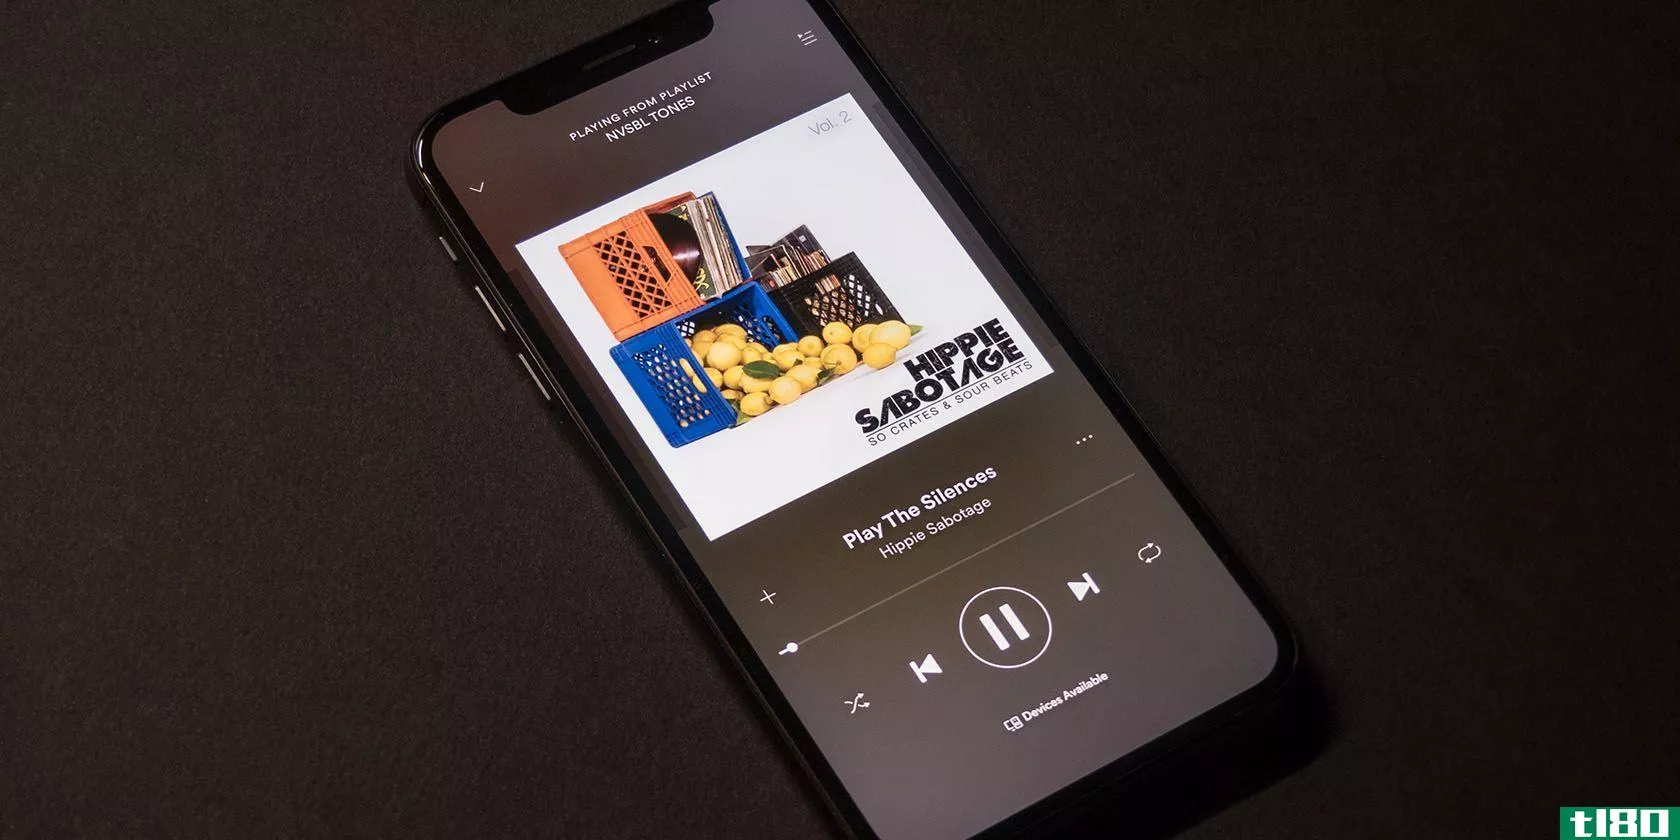 Spotify on Phone